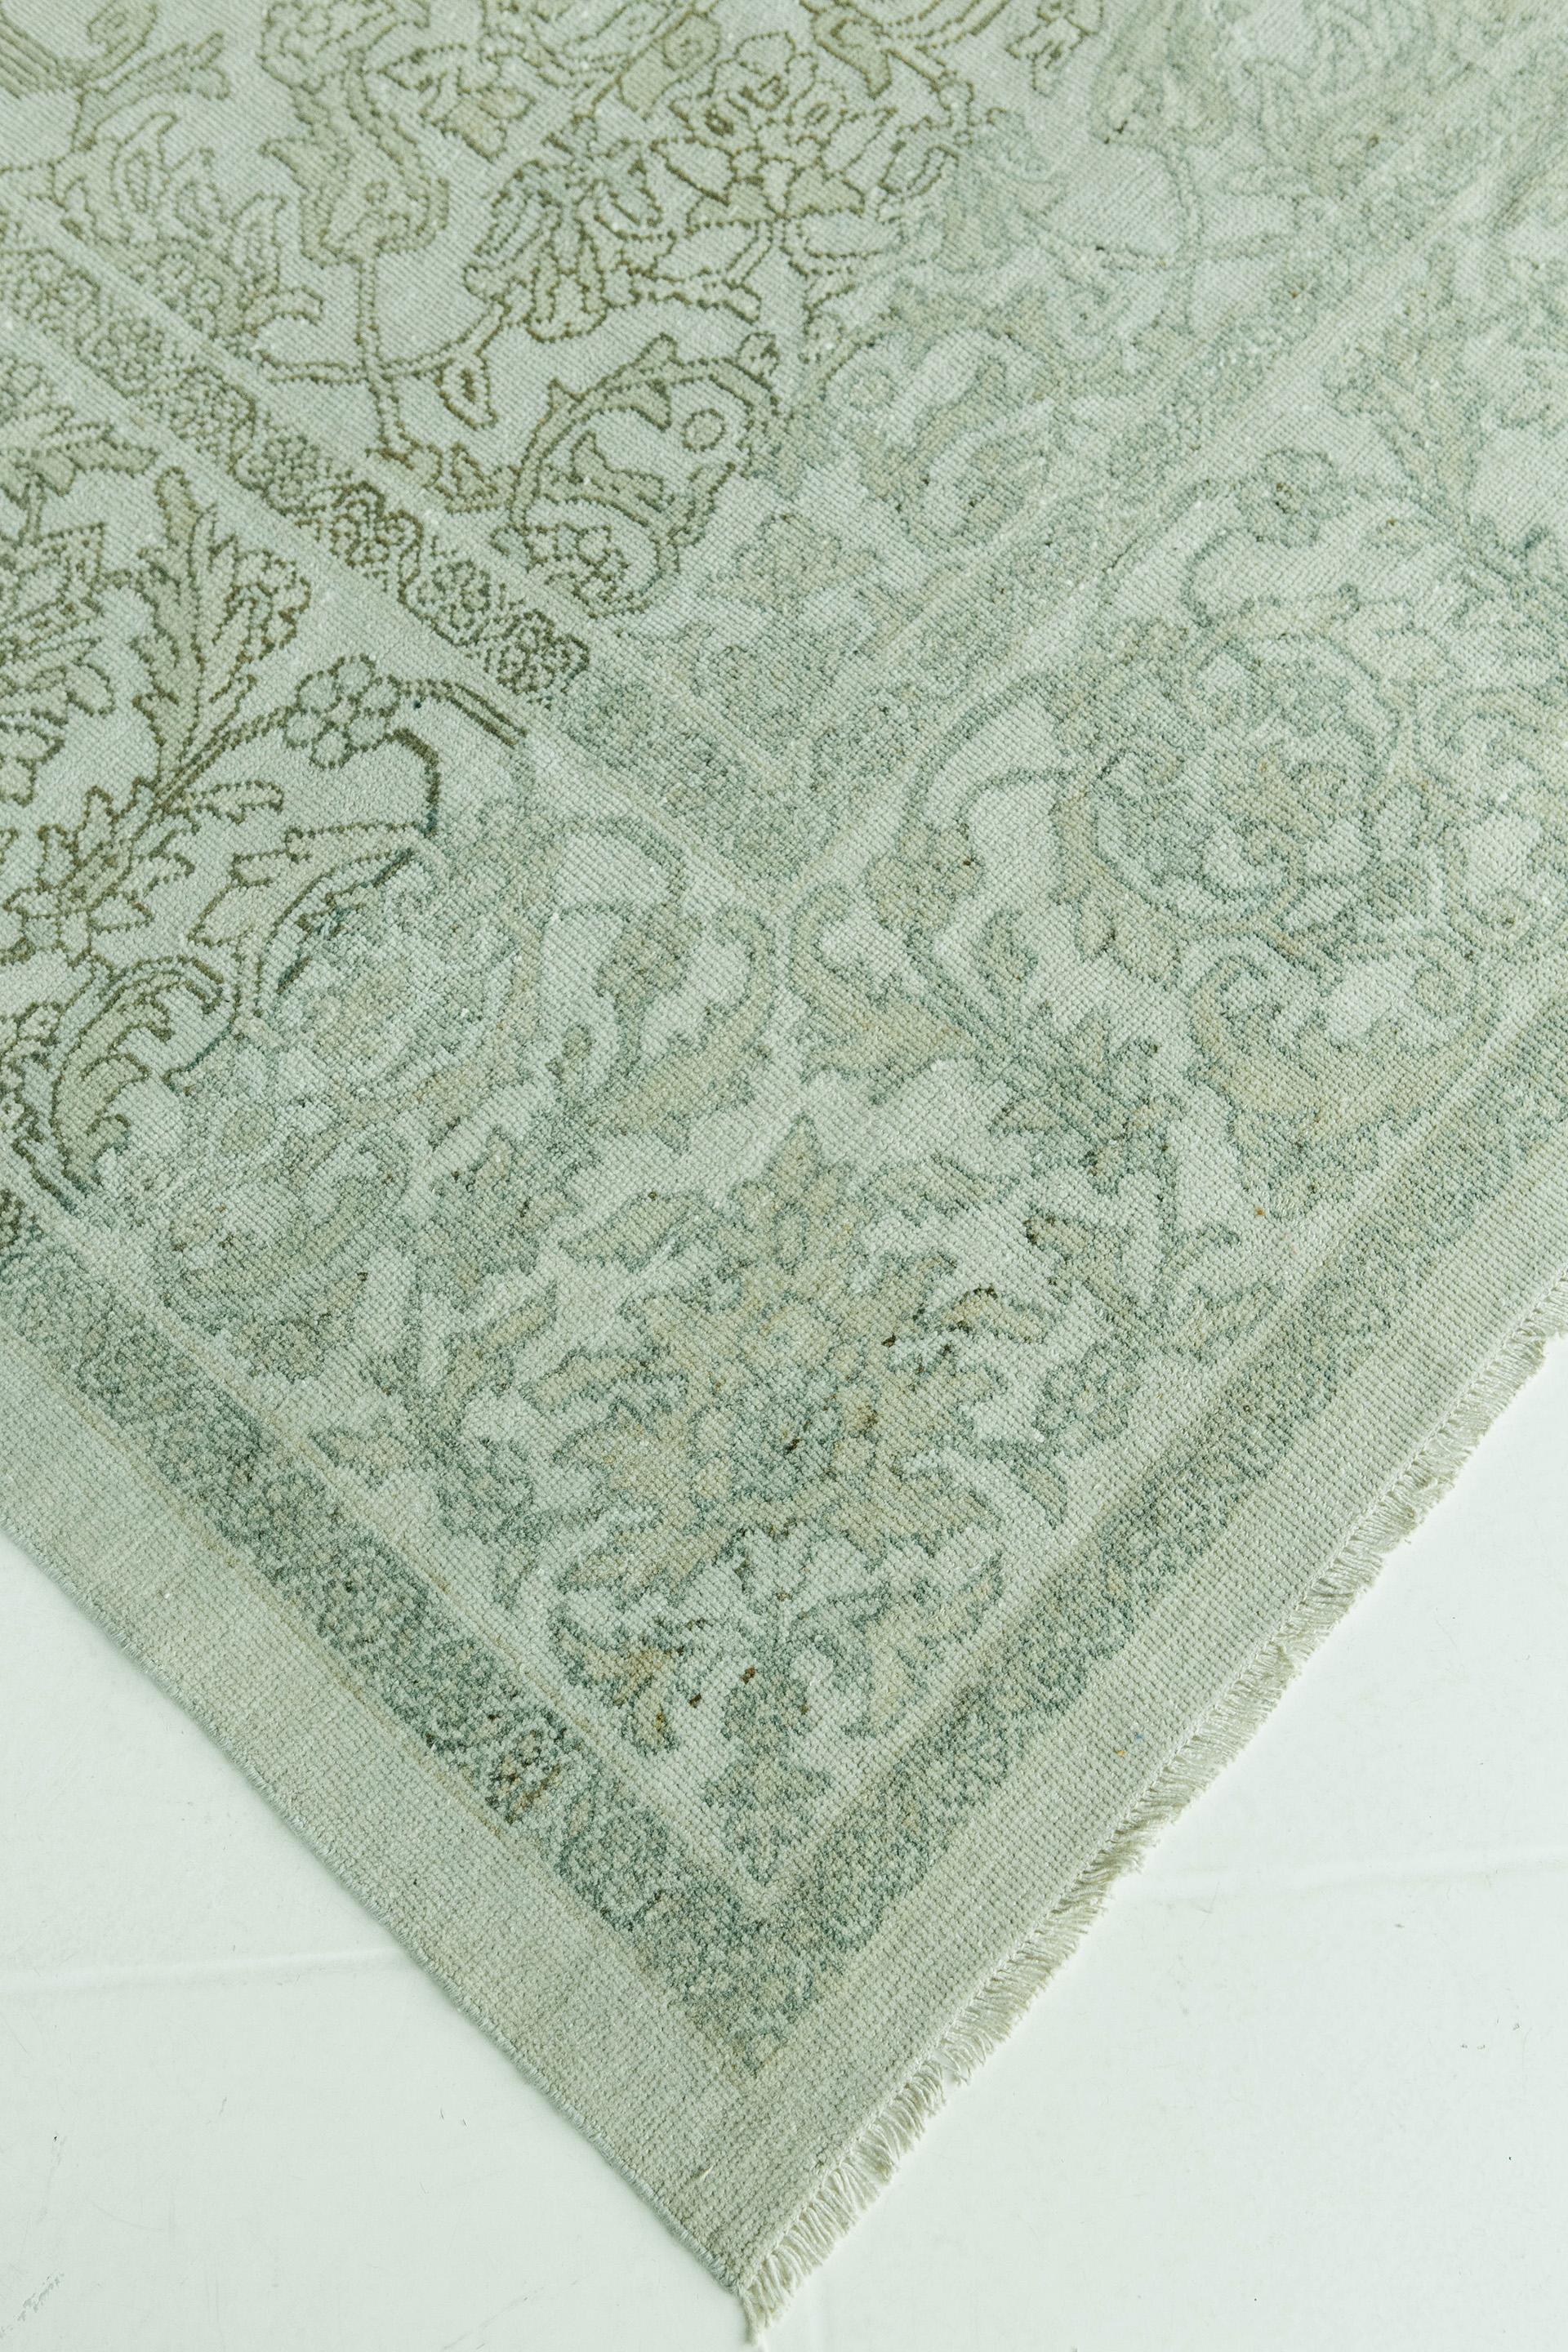 This silvery gray-field antique Sultanabad features vine and palmette motifs with densely floreated medallion, pendant and corner-pieces. Secondary colors include taupe with darker gray and umber outline. The border is an intricate and large scale